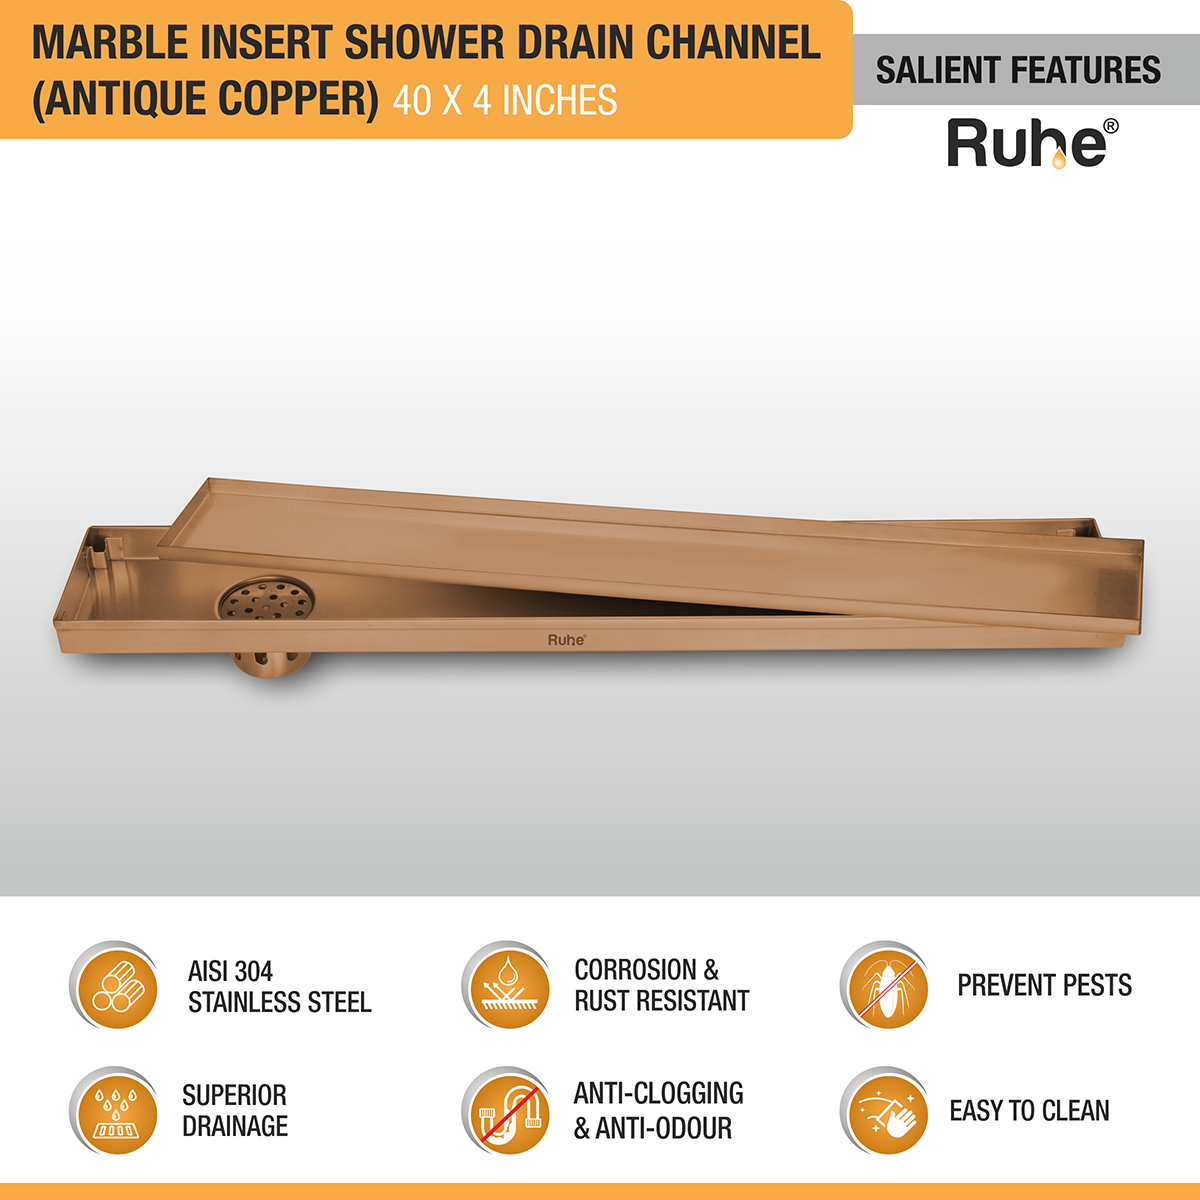 Marble Insert Shower Drain Channel (40 x 4 Inches) ROSE GOLD PVD Coated features and benefits